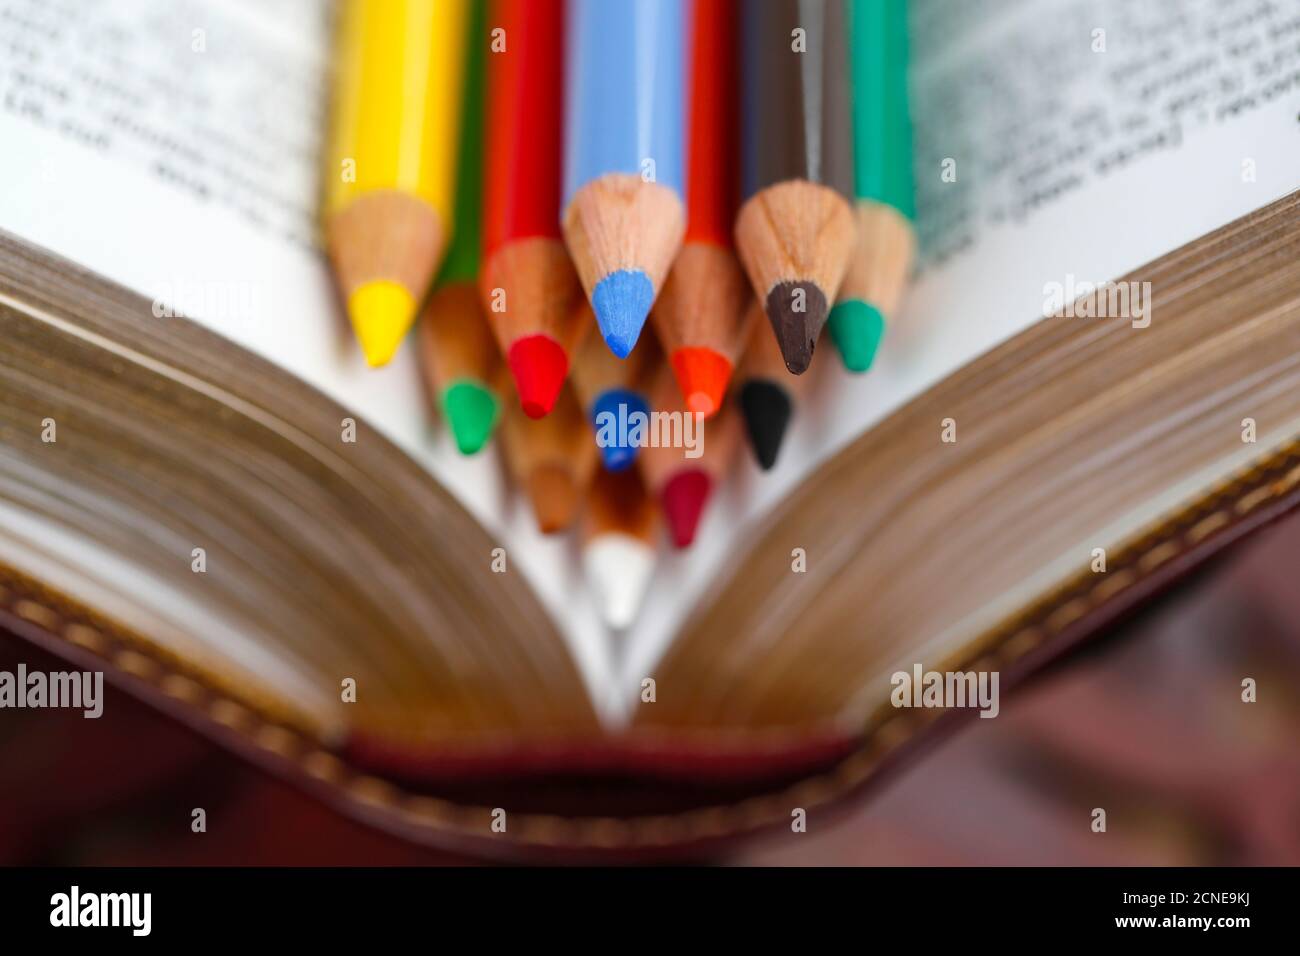 Colored pencils on a Bible, Catechism, France, Europe Stock Photo